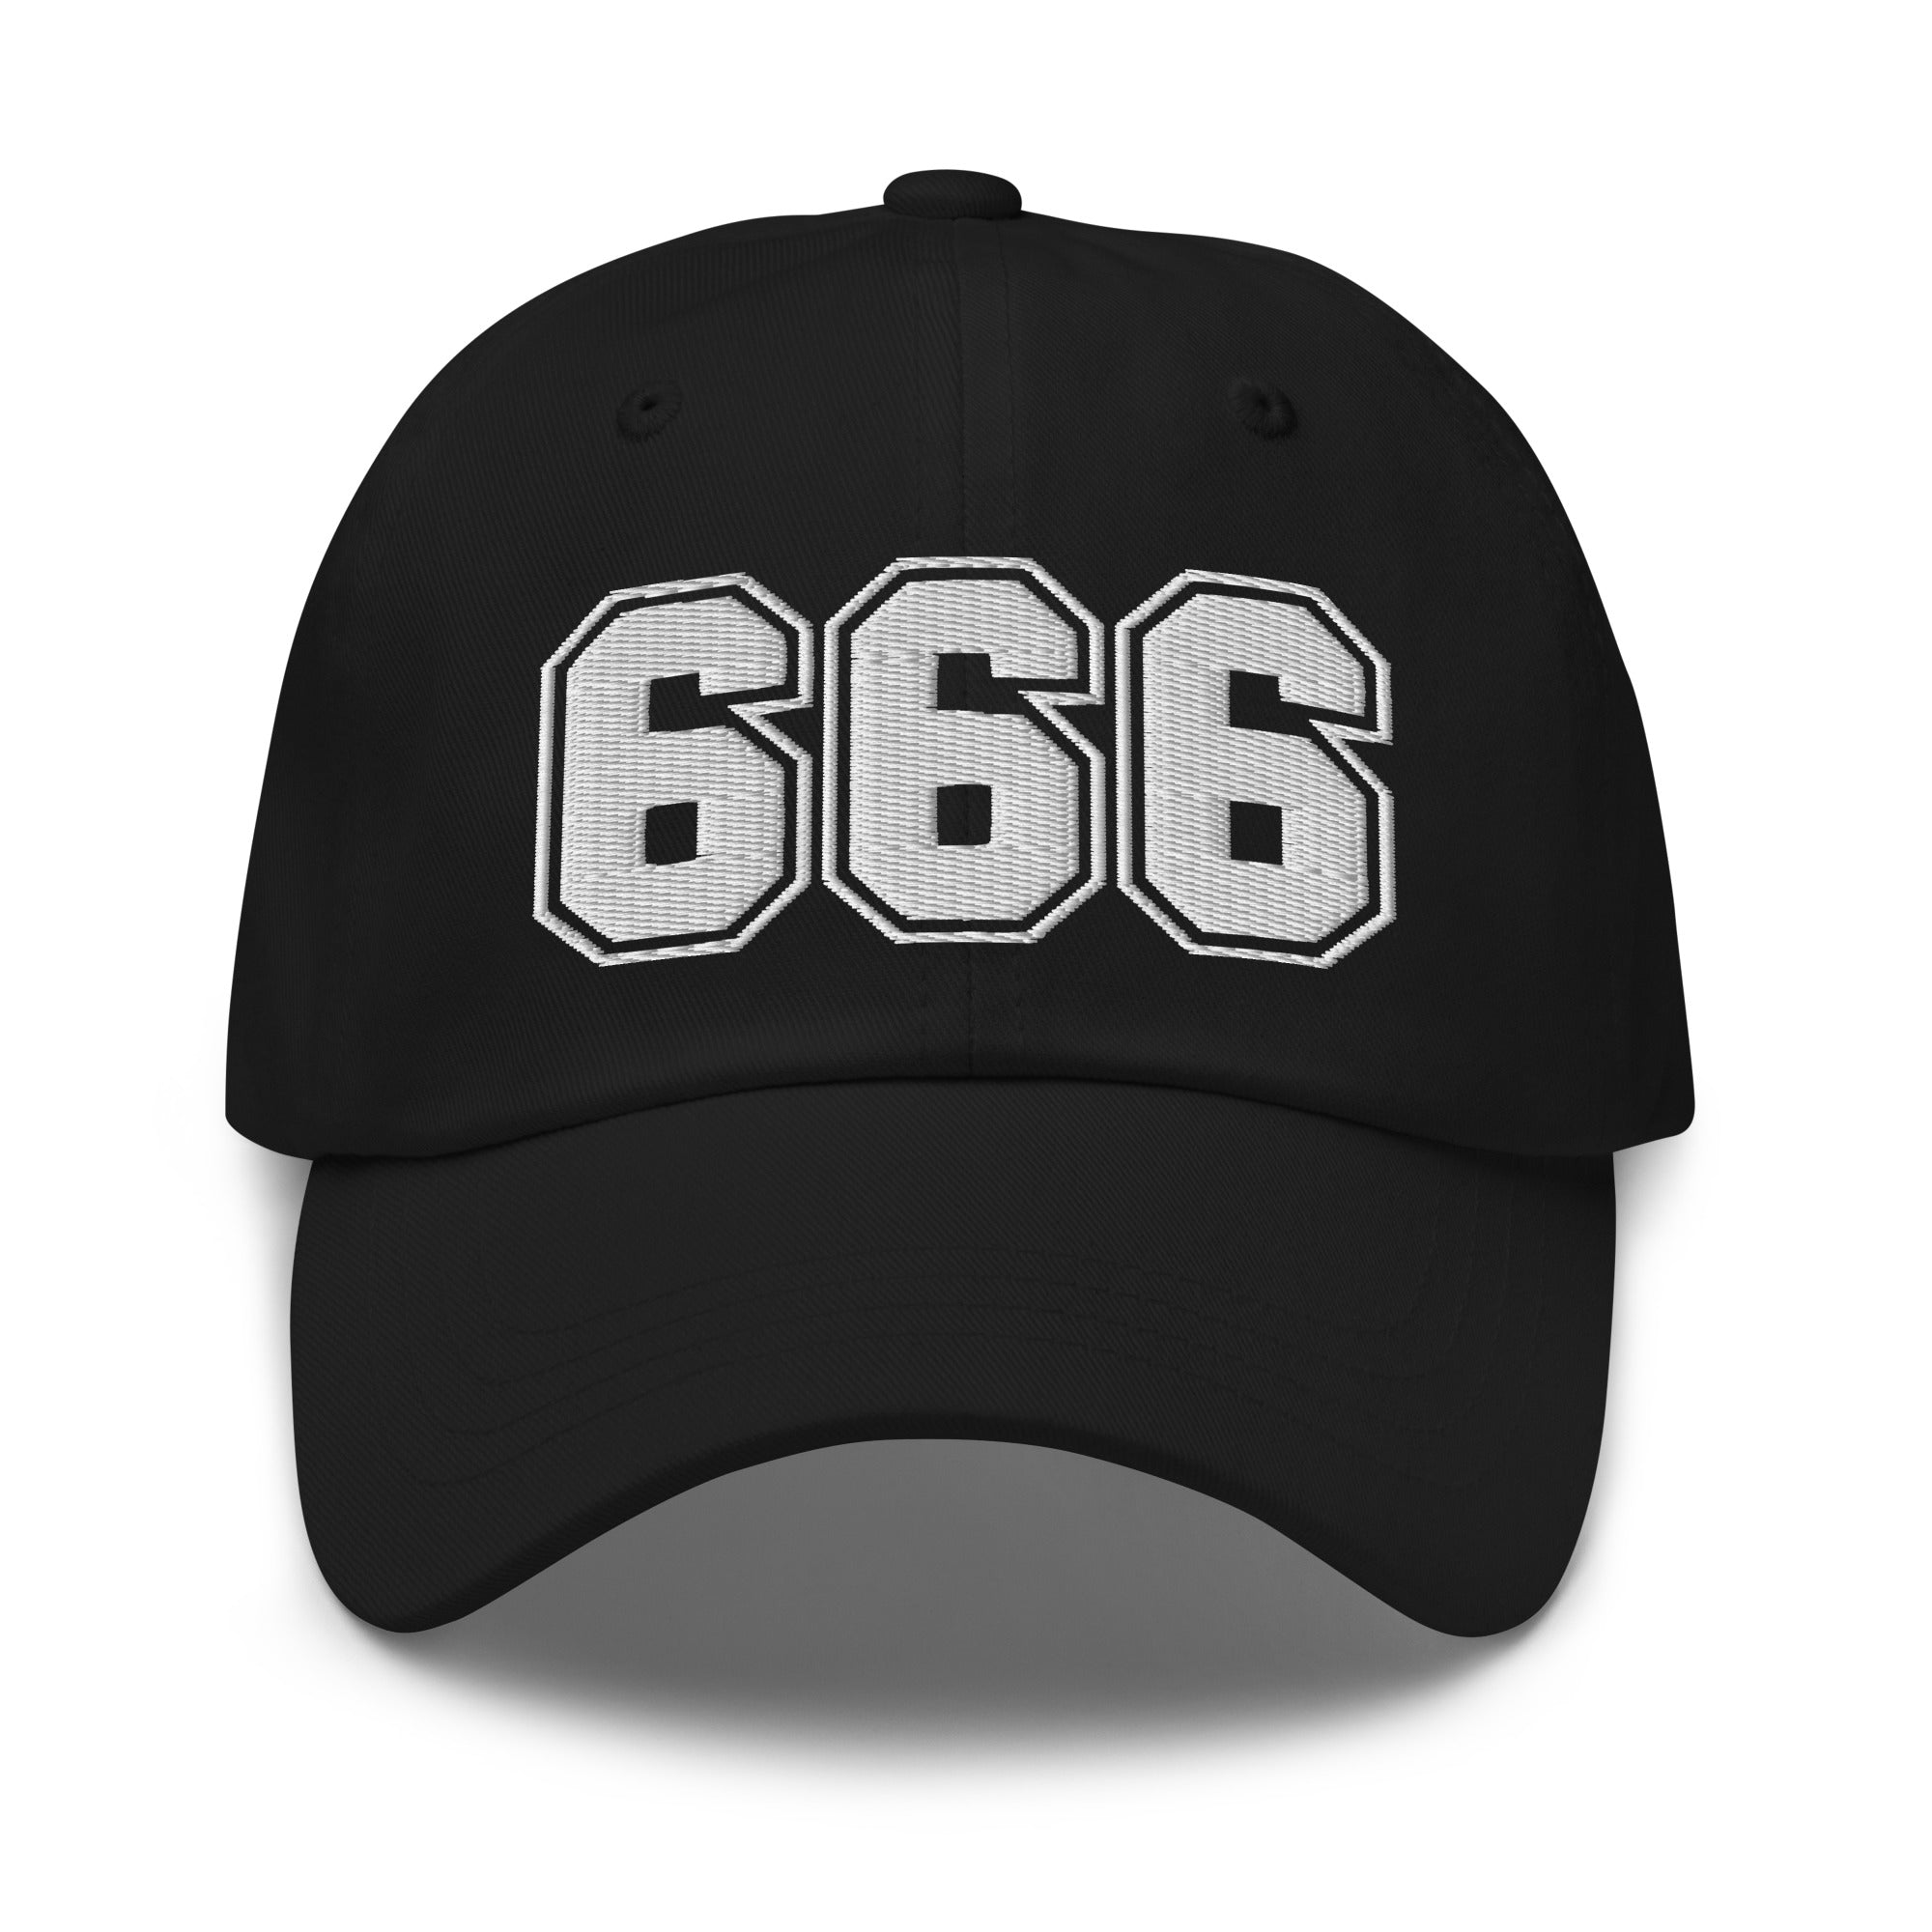 666 The Number of the Beast Evil Embroidered Baseball Cap Dad hat White Thread - Edge of Life Designs